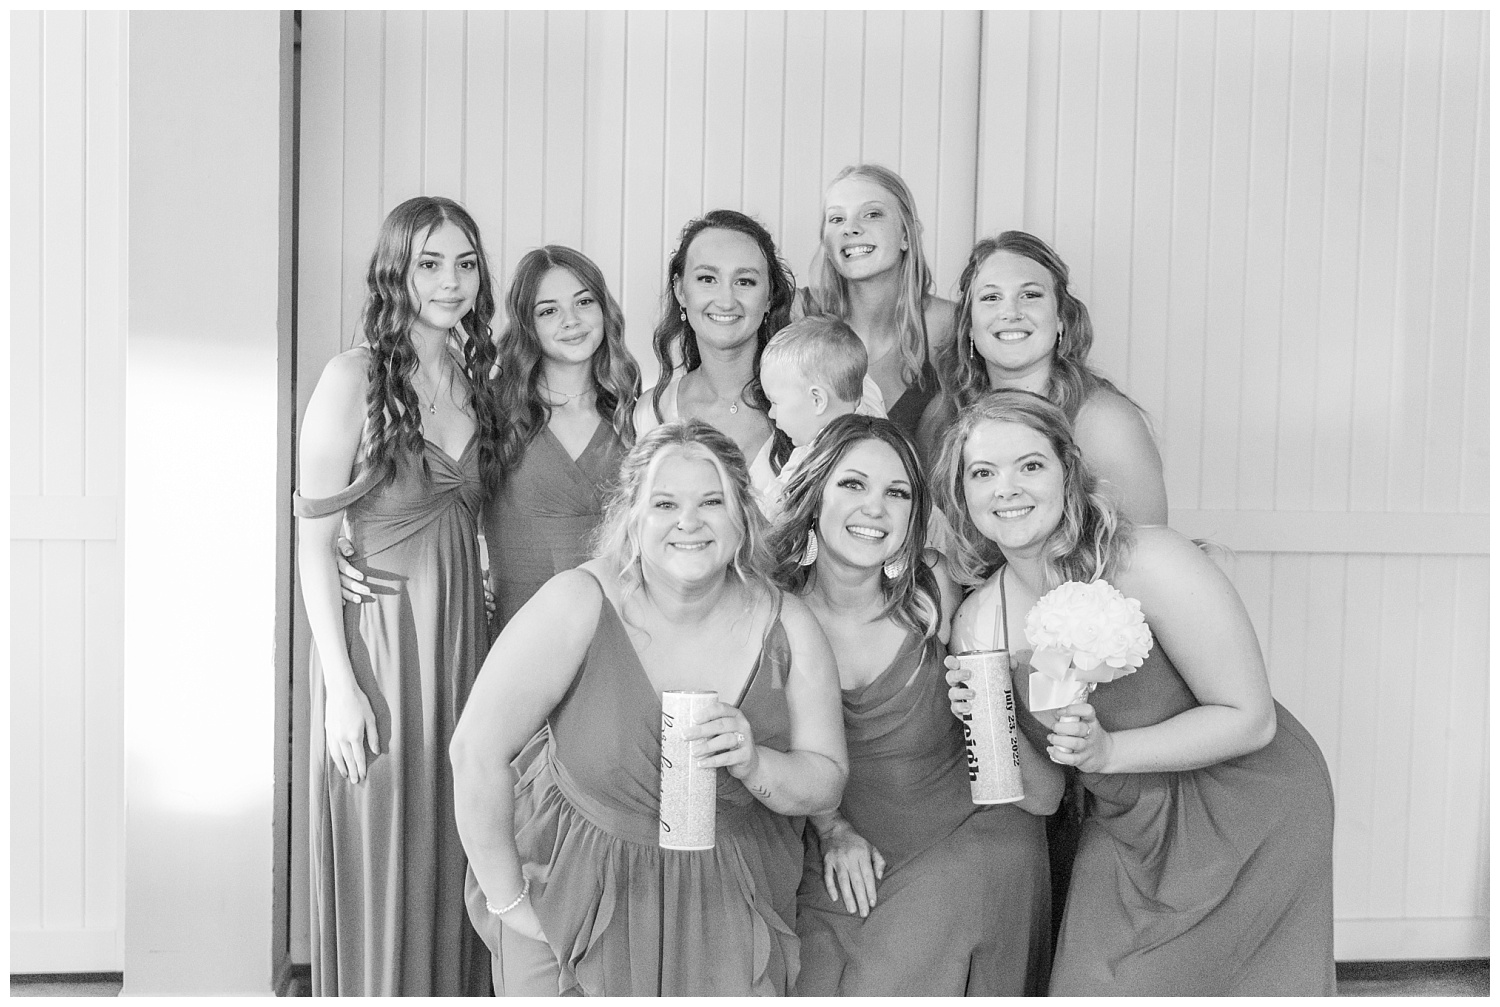 bride and bridesmaids posing together at reception